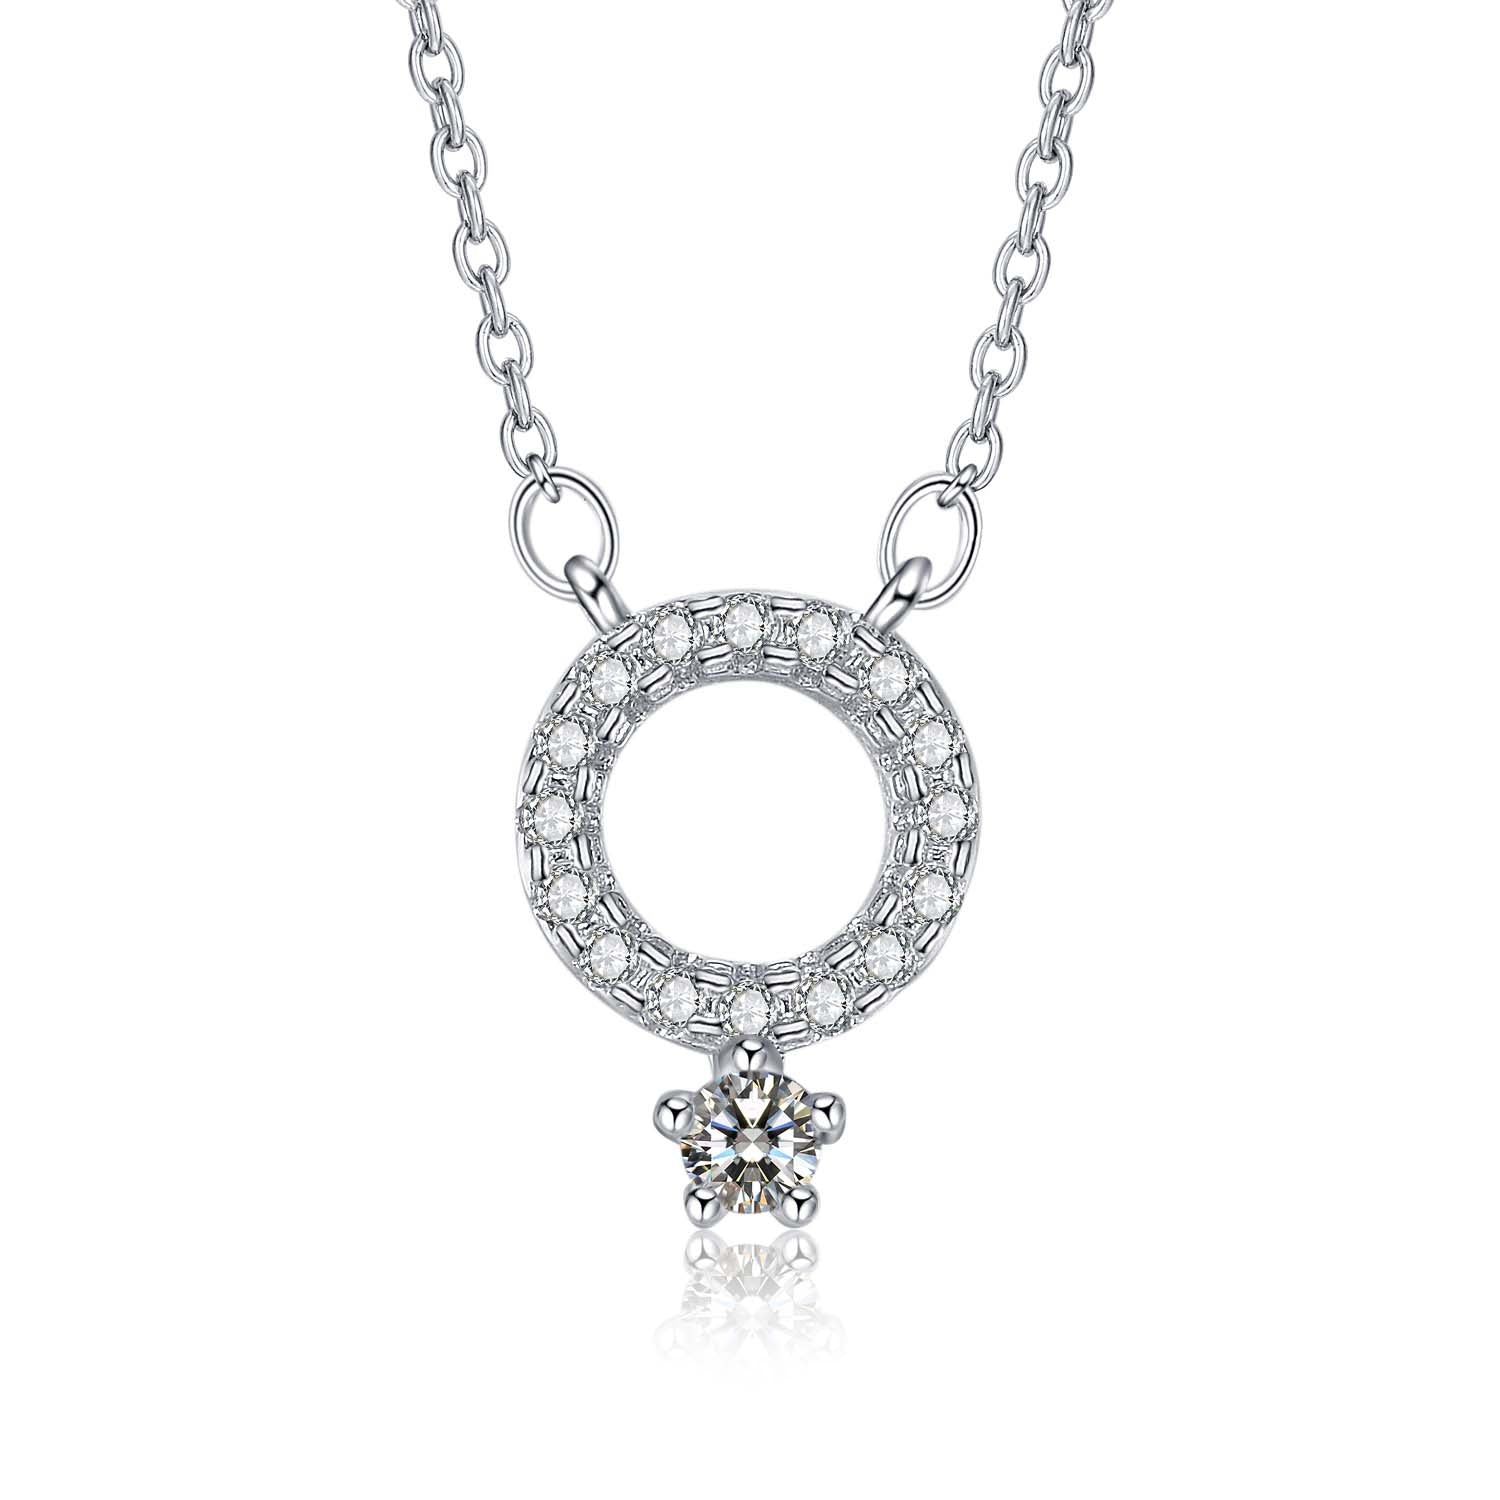 Geometric Cubic Zirconia Necklaces Round Circle And Star Pendant Necklace